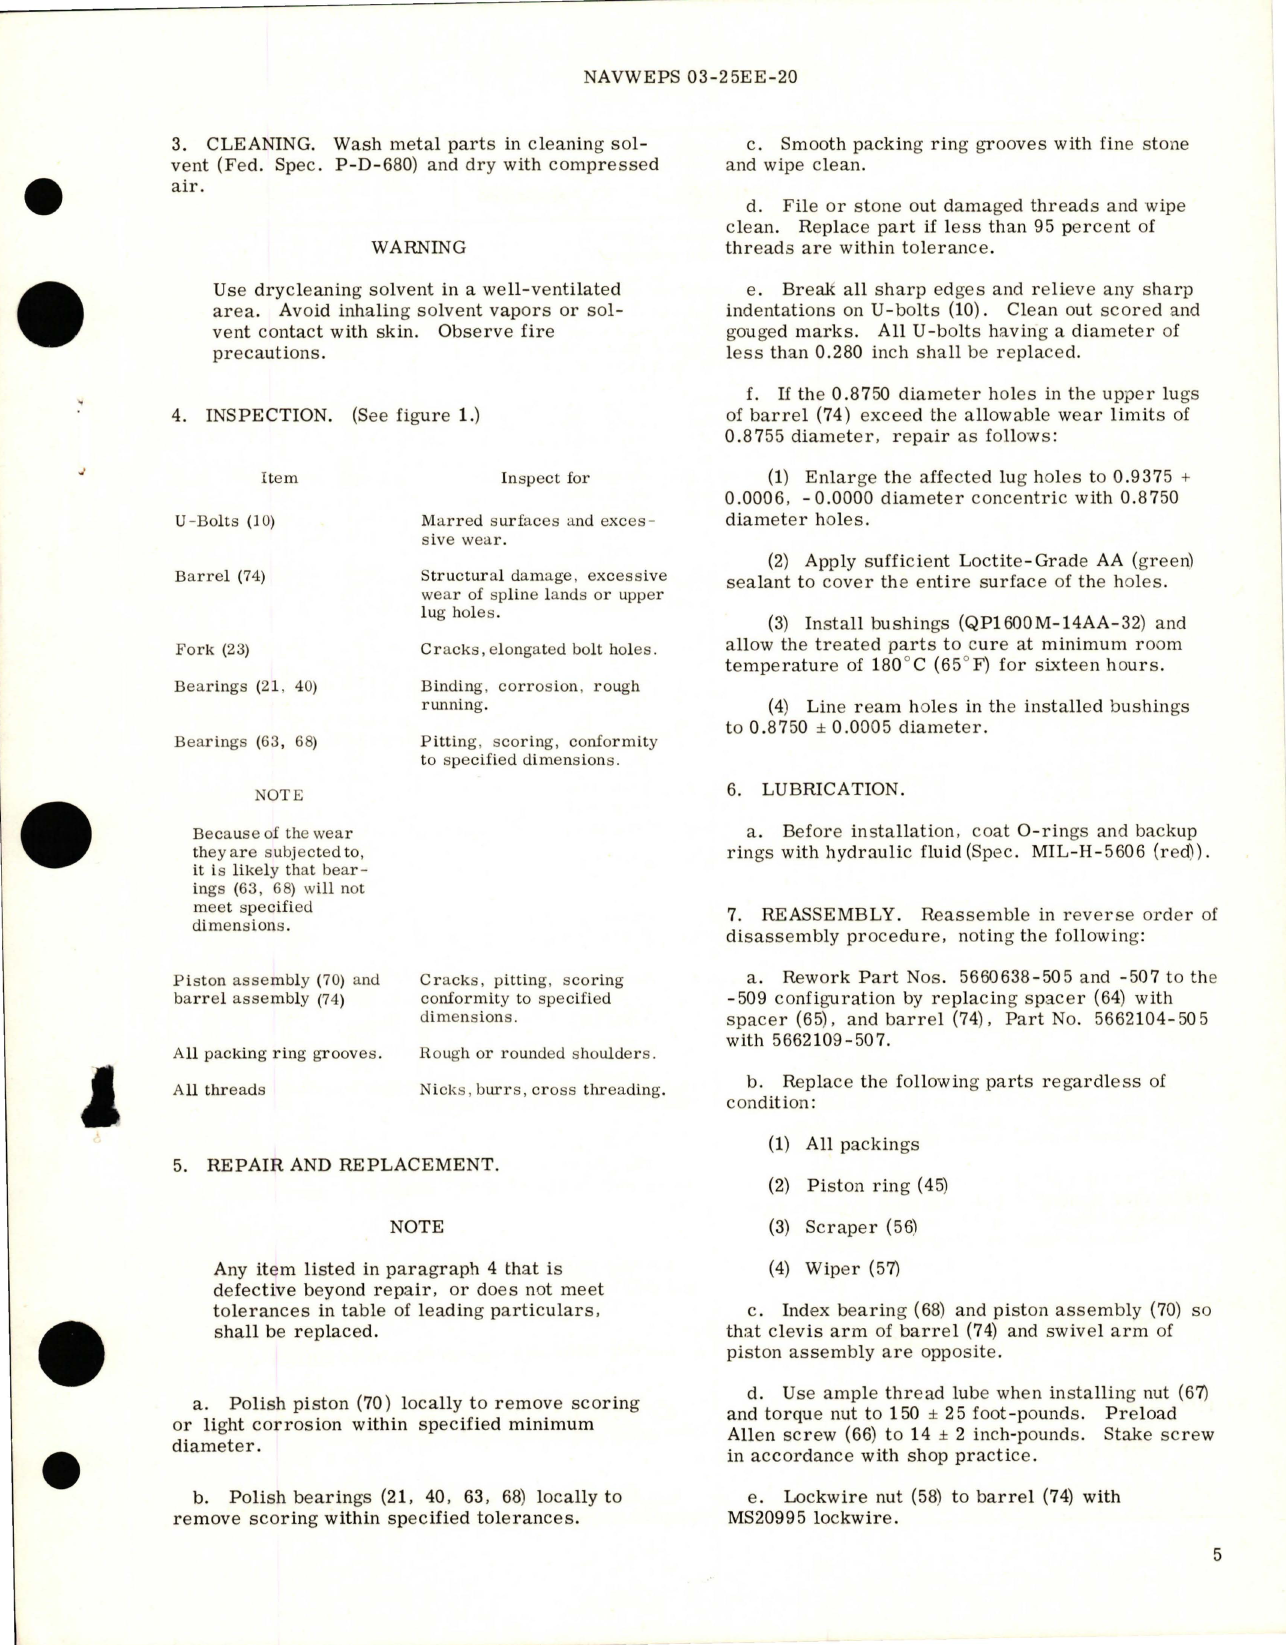 Sample page 5 from AirCorps Library document: Overhaul Instructions with Parts Breakdown for 18-Inch Stroke Nose Landing Gear Strut Assembly - Part 5660638-505, 5660638-507, and 5660638-509